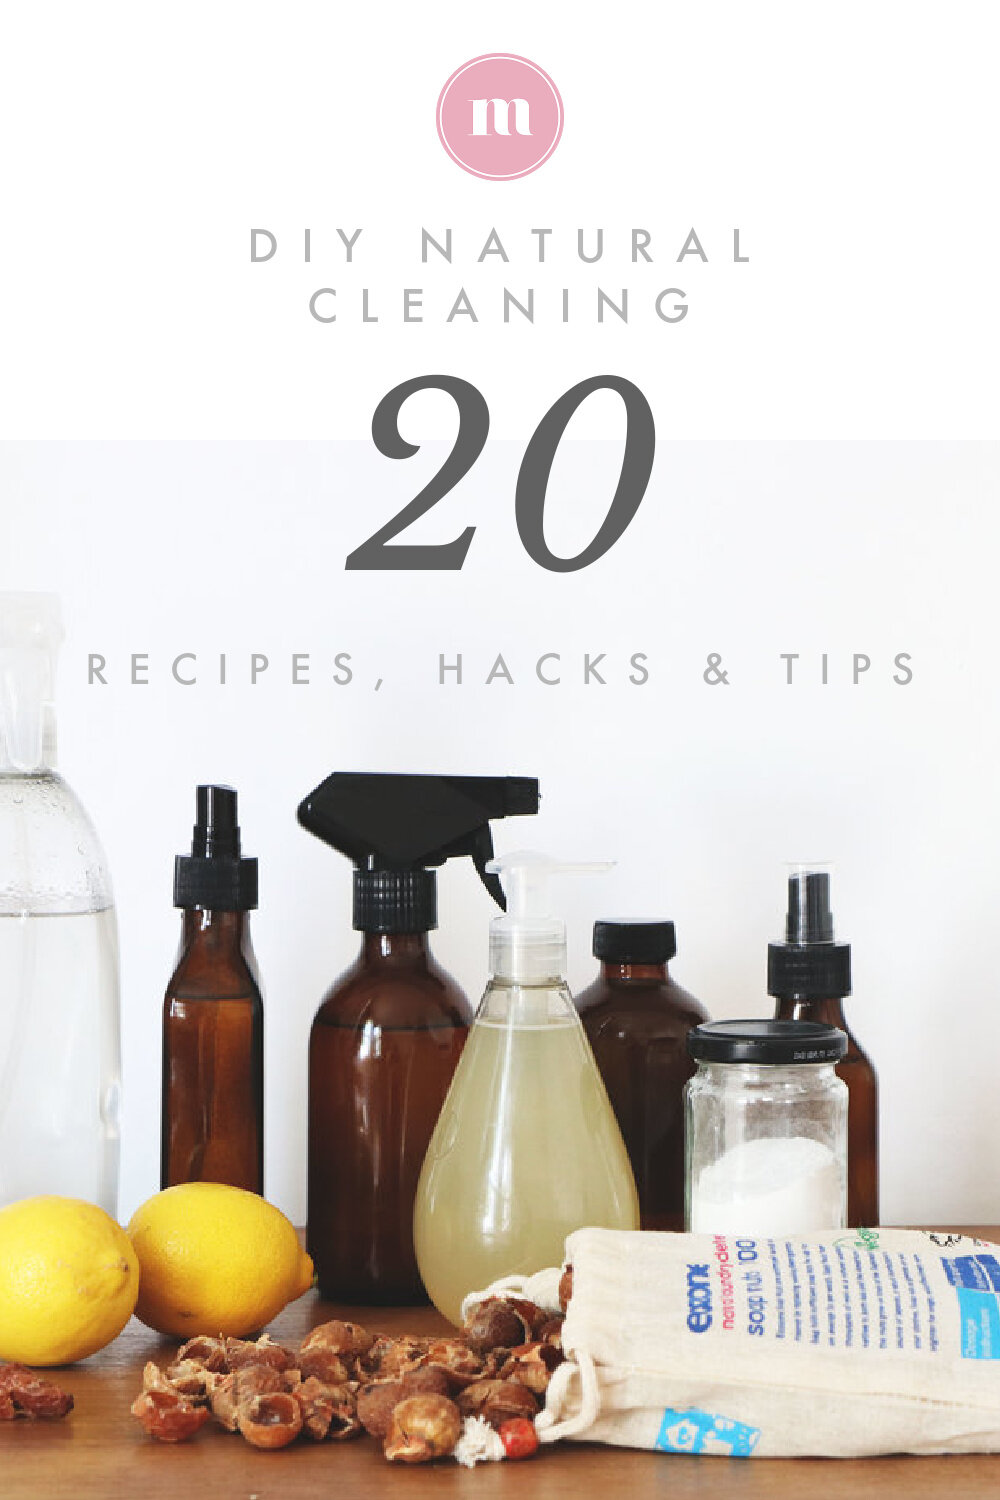 Using Essential Oils for Laundry: 5 Easy DIY's for You to Try